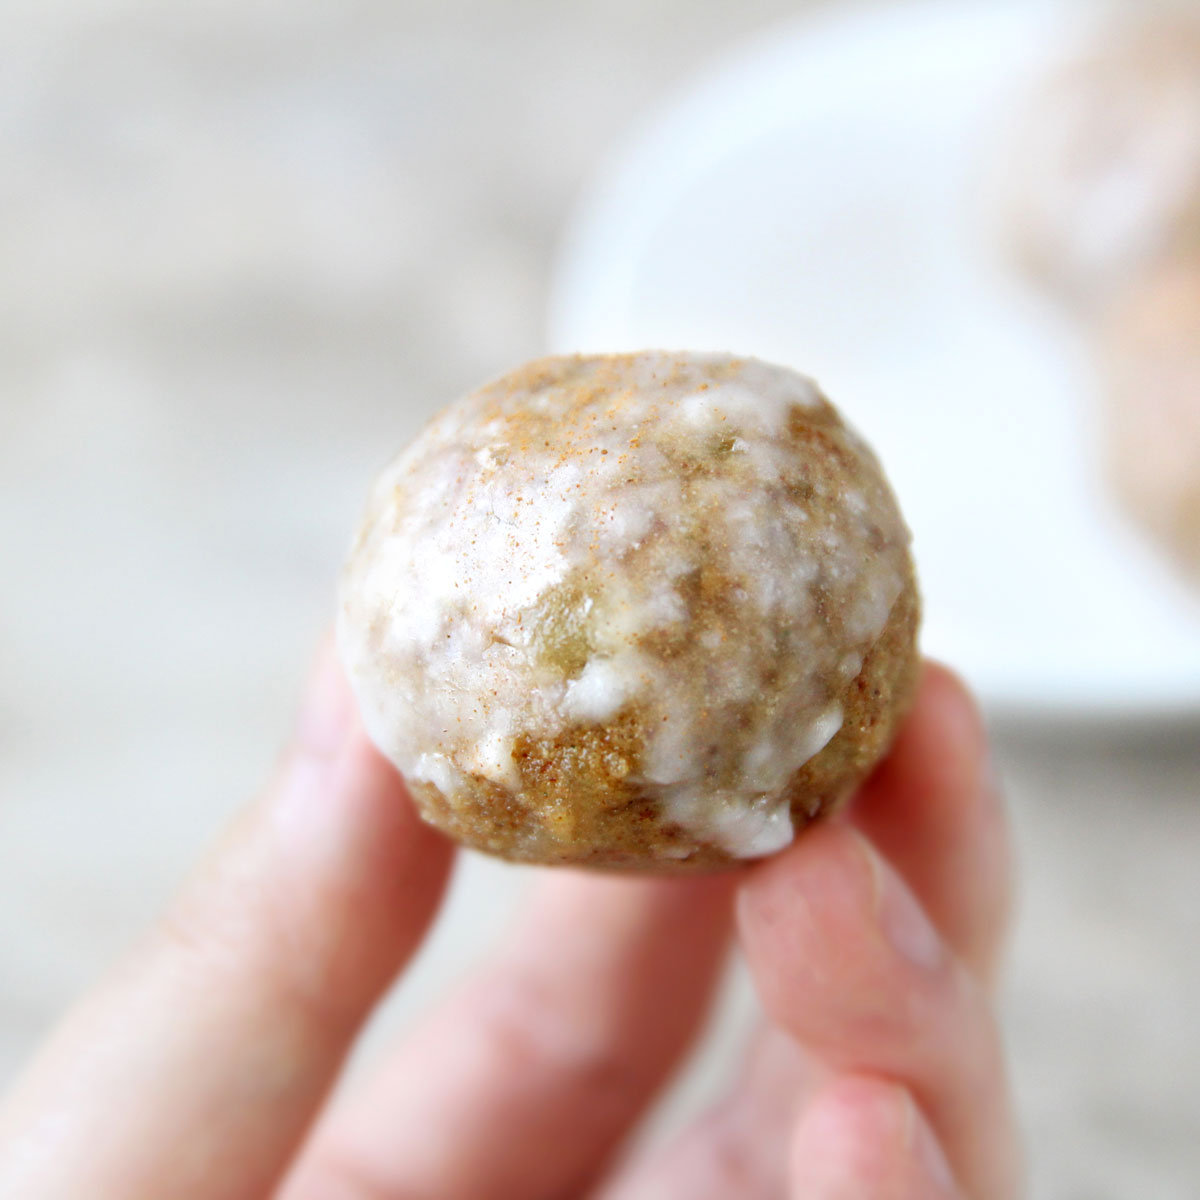 10 Easy & Healthy Protein Ball Recipes Made with Fruit, Veggies, Nuts and Seeds - protein balls